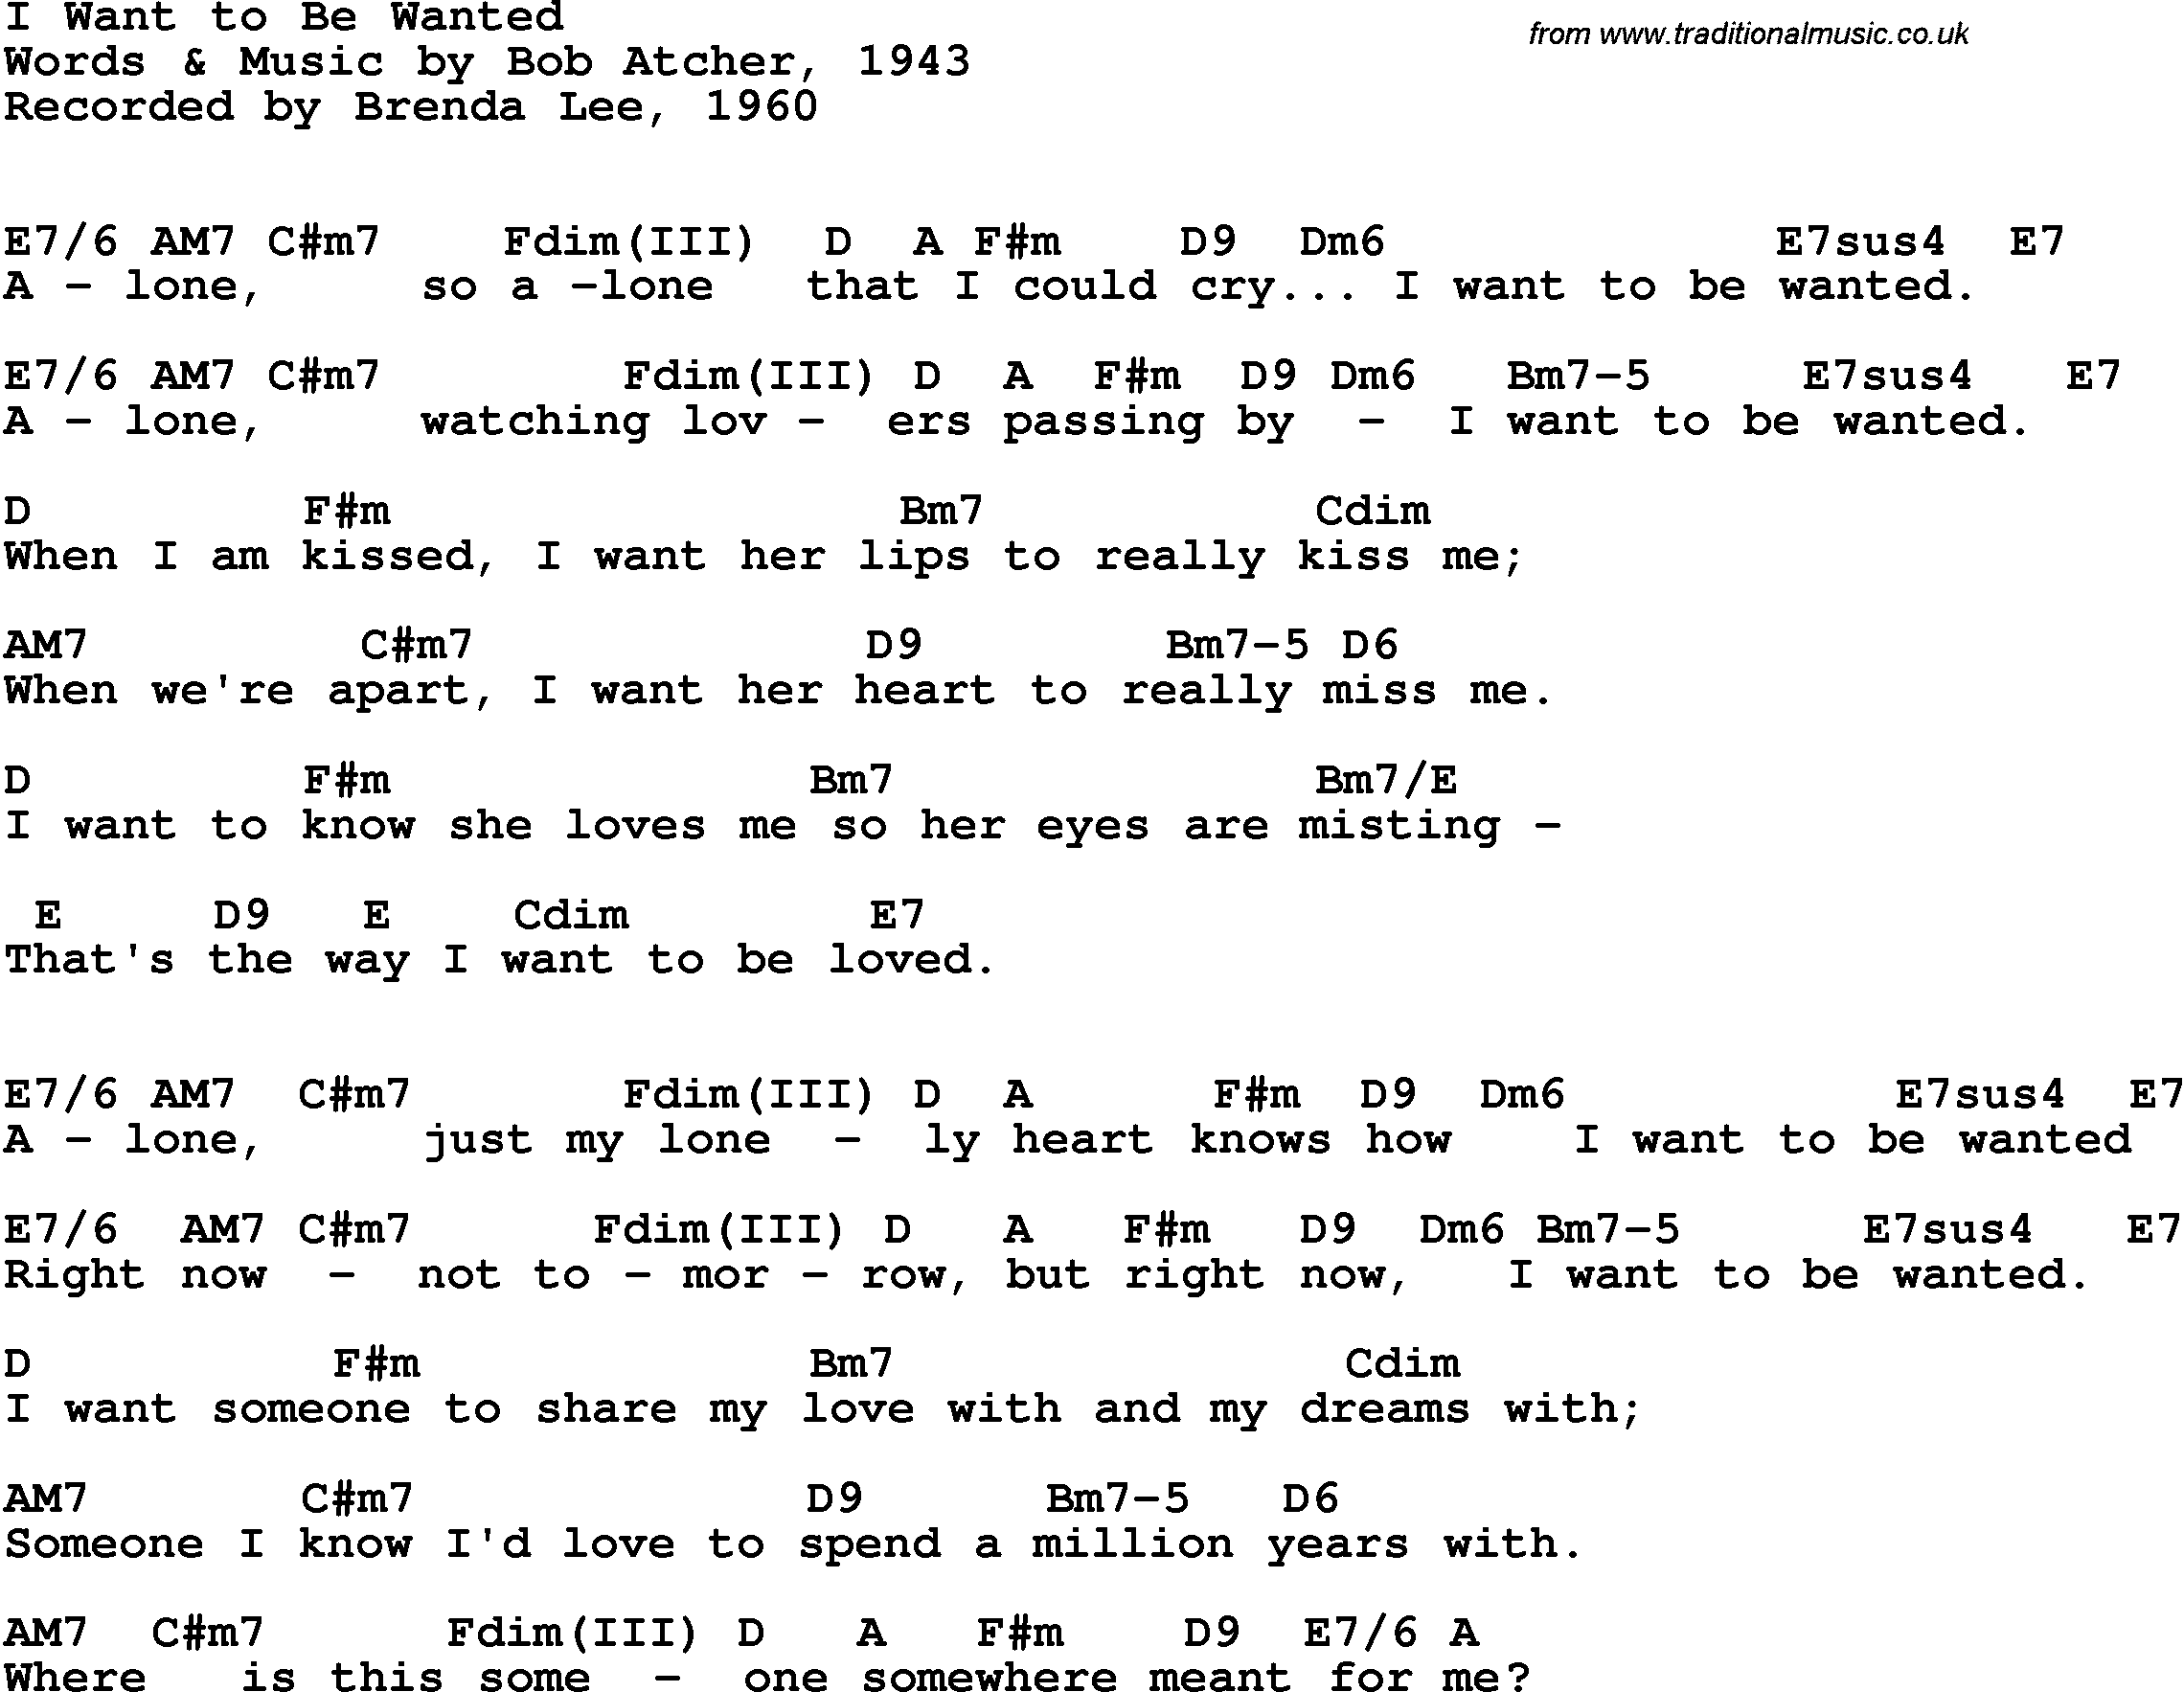 Song Lyrics with guitar chords for I Want To Be Wanted - Brenda Lee, 1960